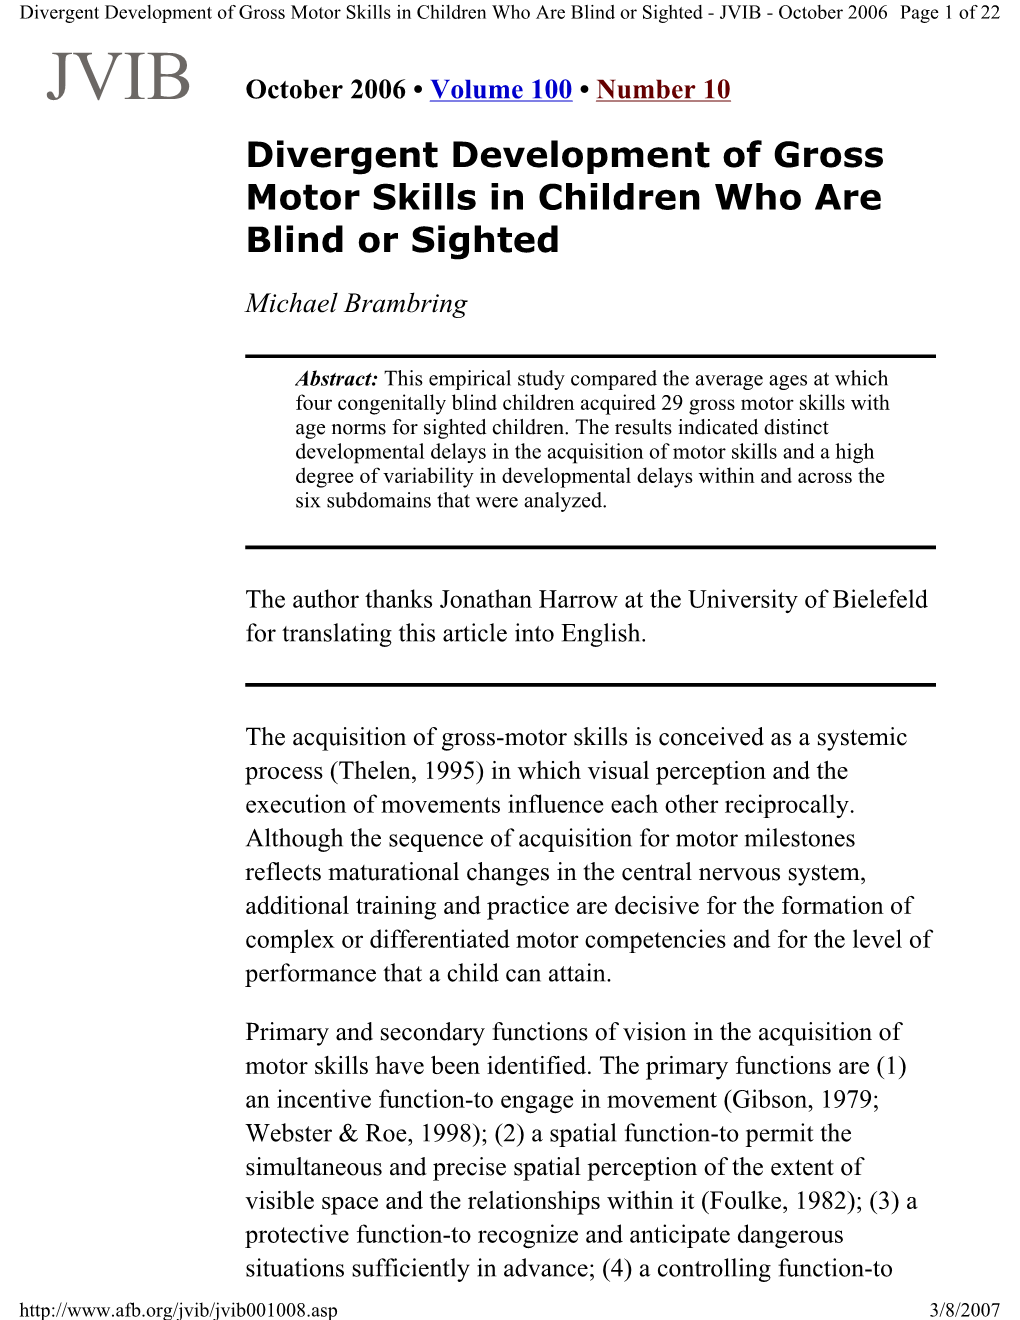 Divergent Development of Gross Motor Skills in Children Who Are Blind Or Sighted - JVIB - October 2006 Page 1 of 22